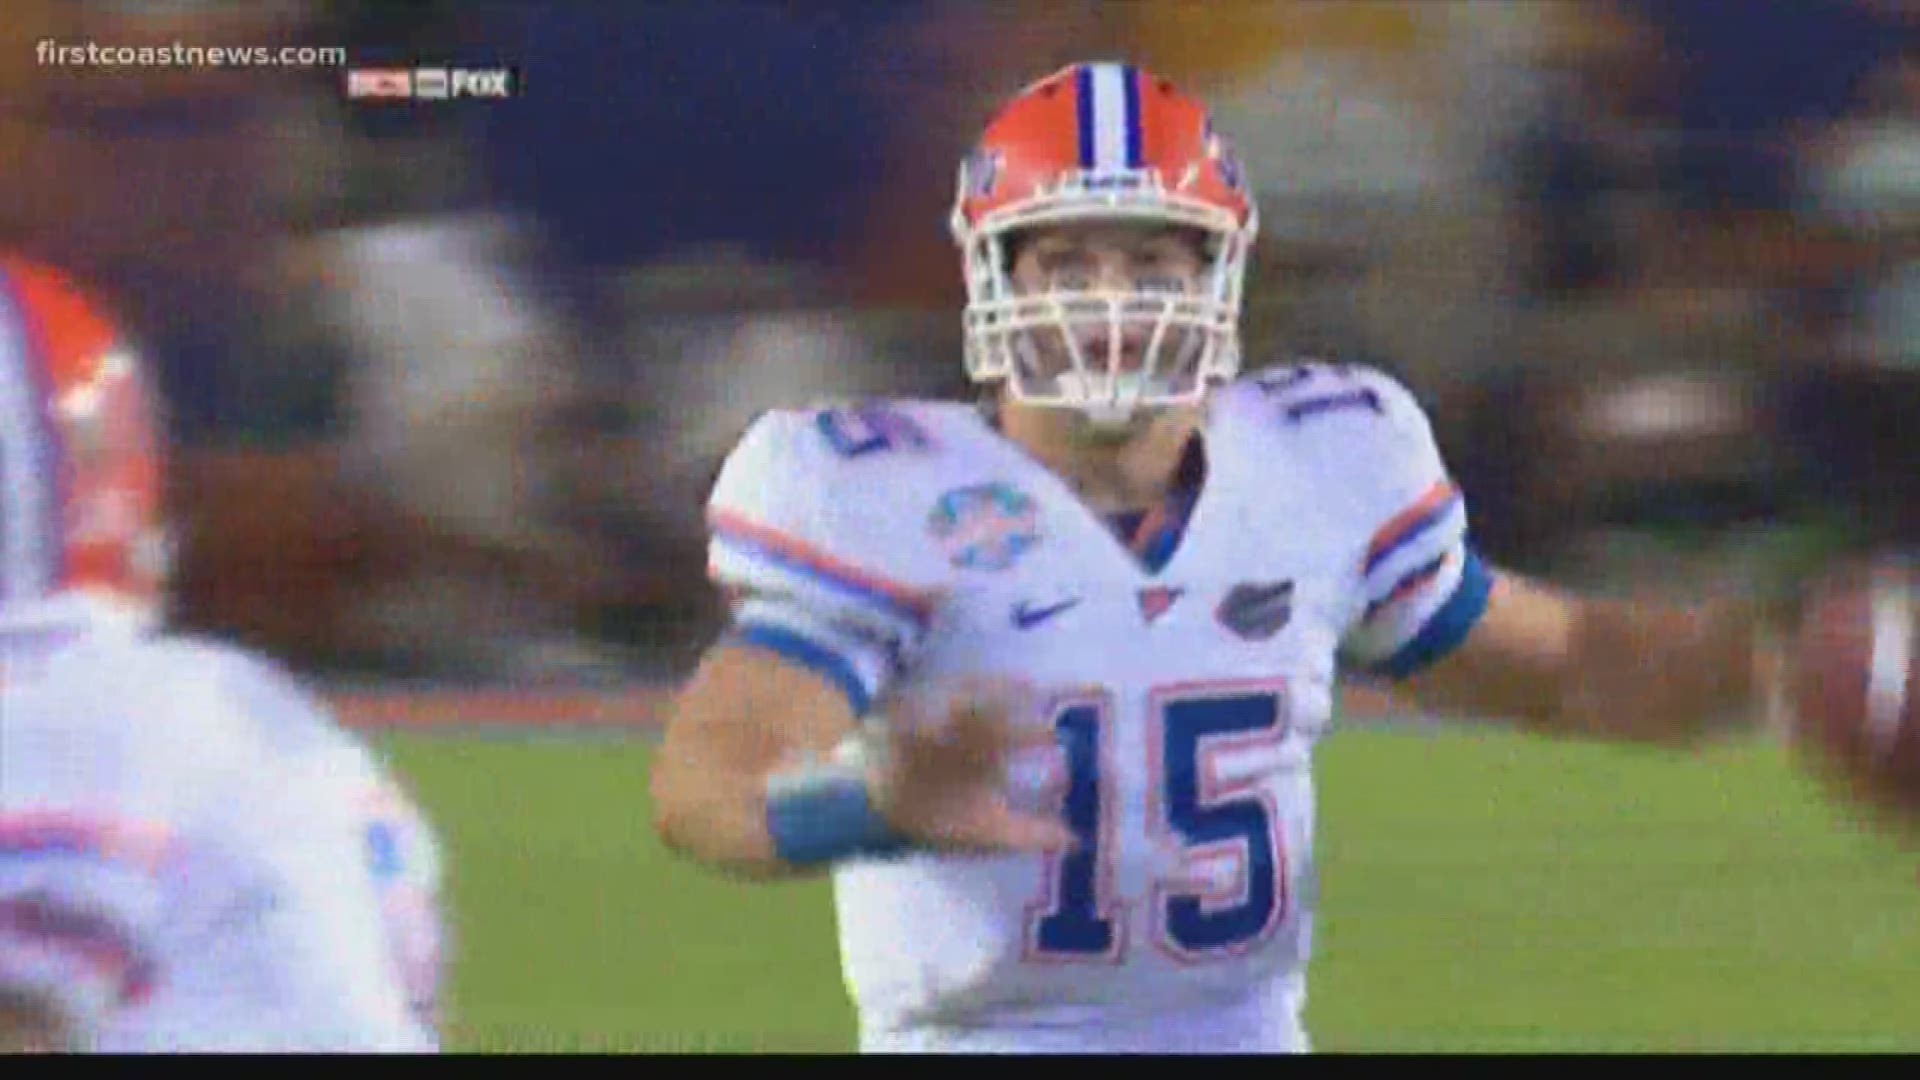 Jacksonville native and Gators great Tim Tebow will be inducted into the University of Florida Football's Ring of Honor, the program announced Wednesday.